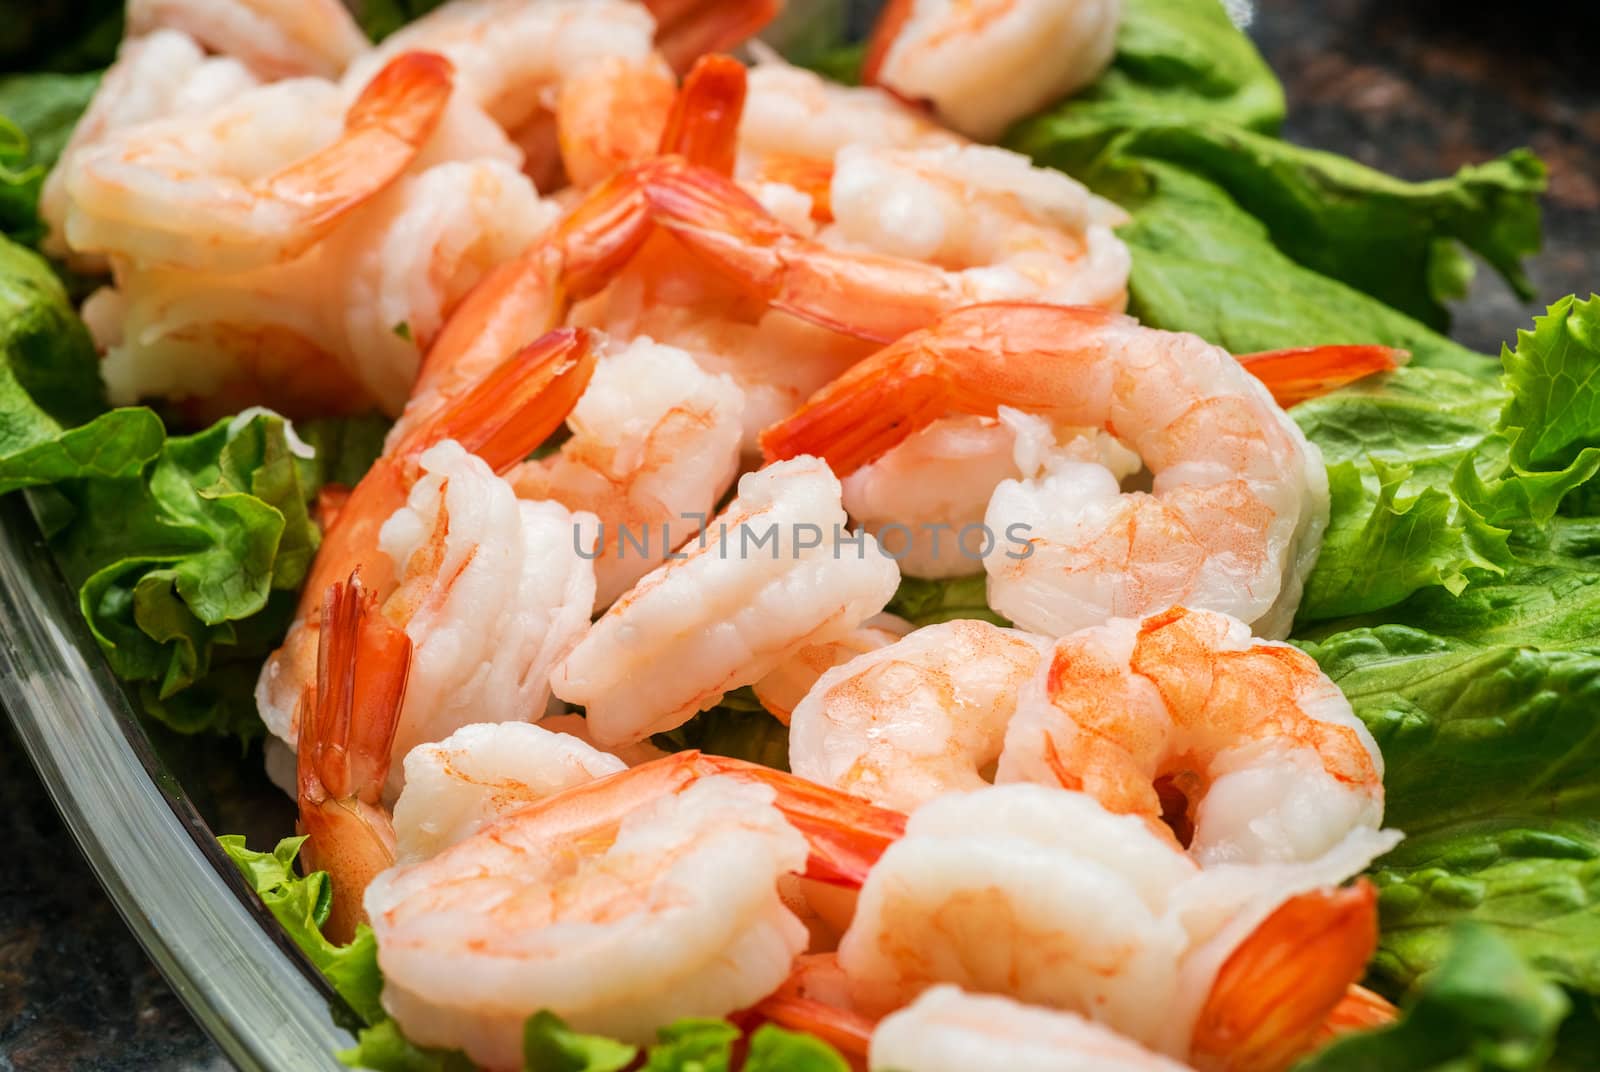 A colorful dish of cooked chilled shrimp with lettuce leaves